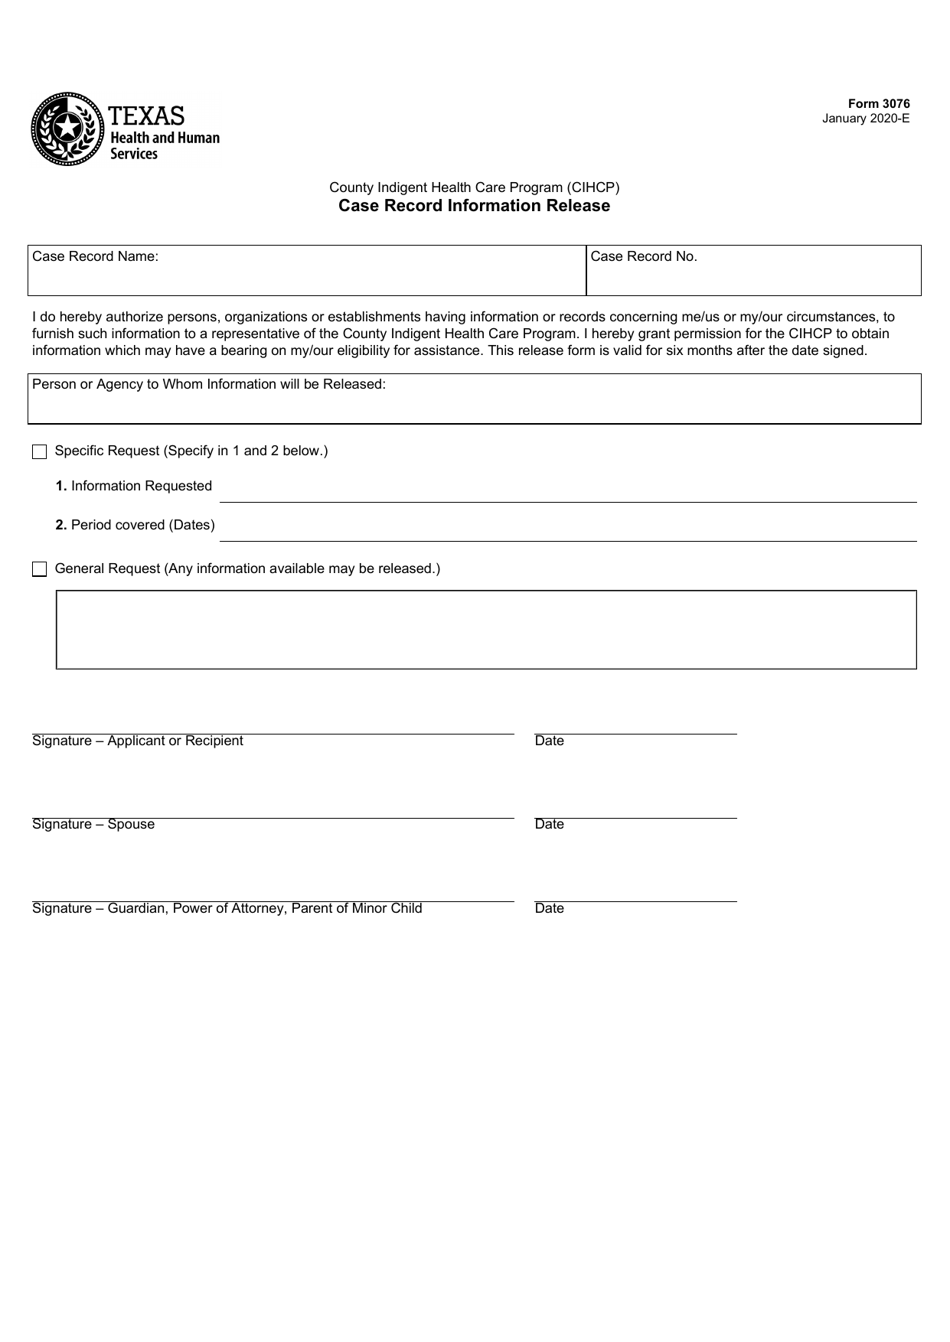 Form 3076 Case Record Information Release - Texas, Page 1